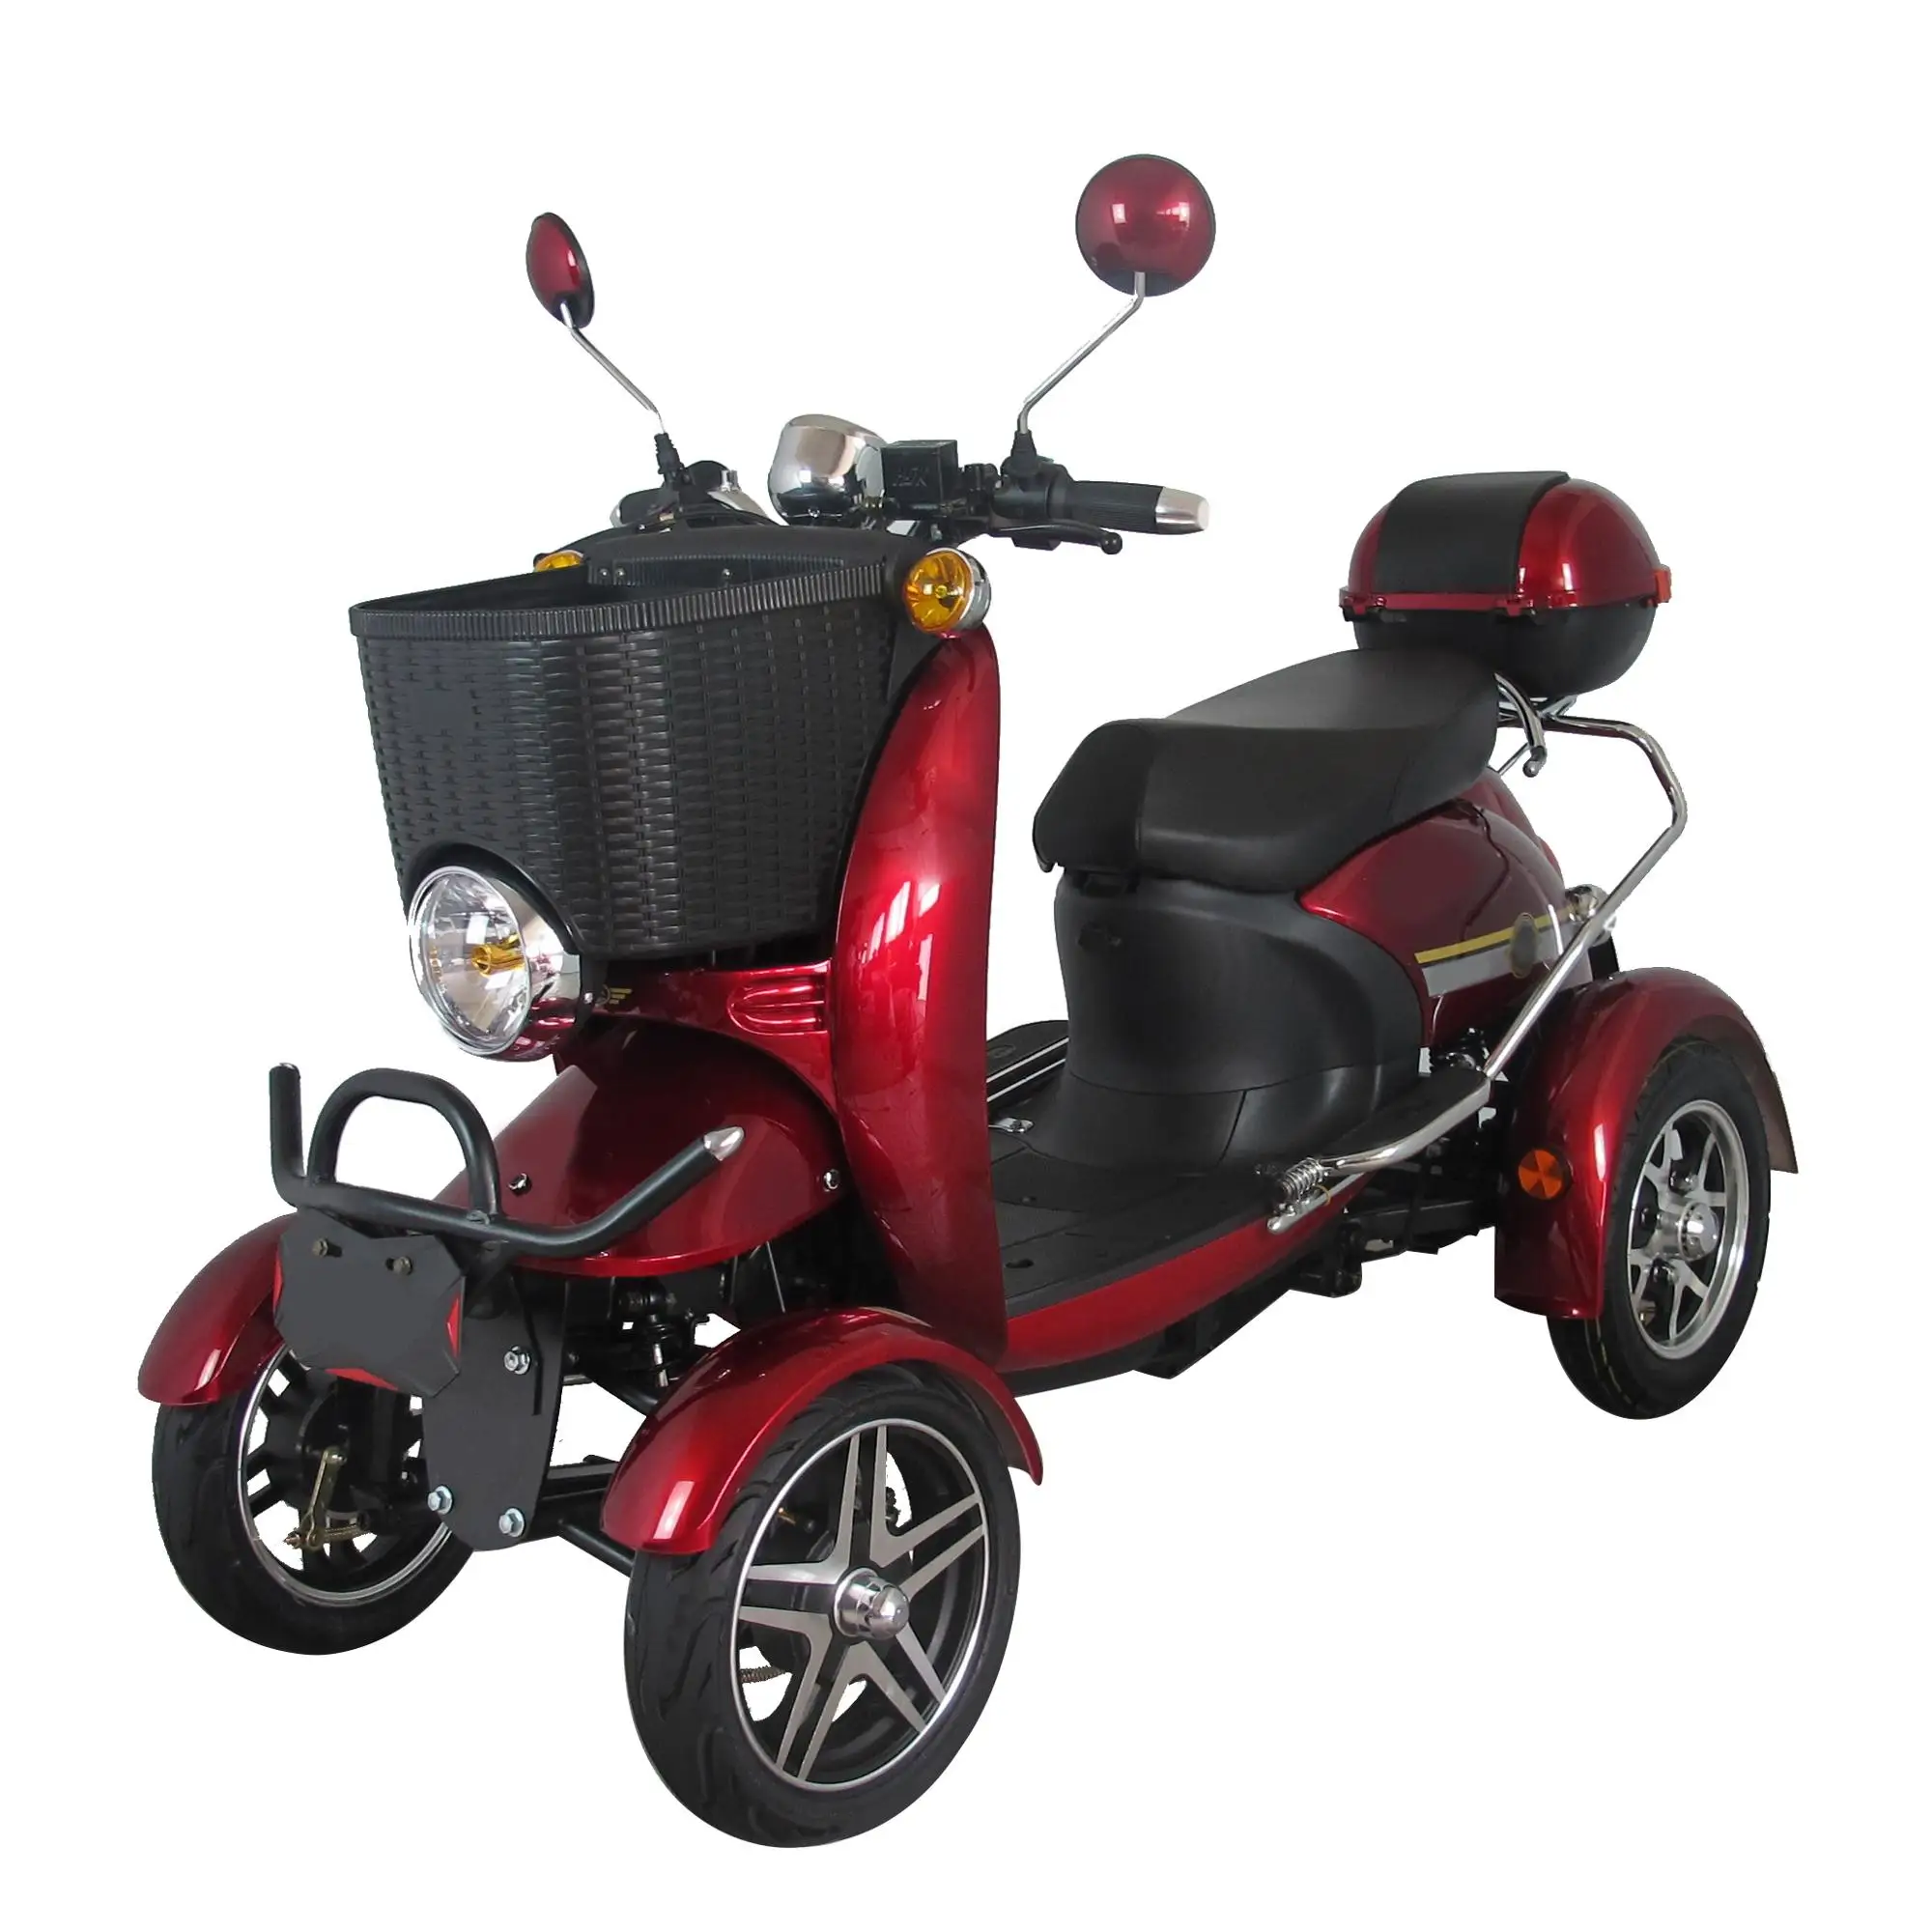 Europe Hot Selling 4wheels Electric Scooter For Sale - Buy Europe Electric  Scooter,Mobility Scooter,Scooters For Old People Product on 